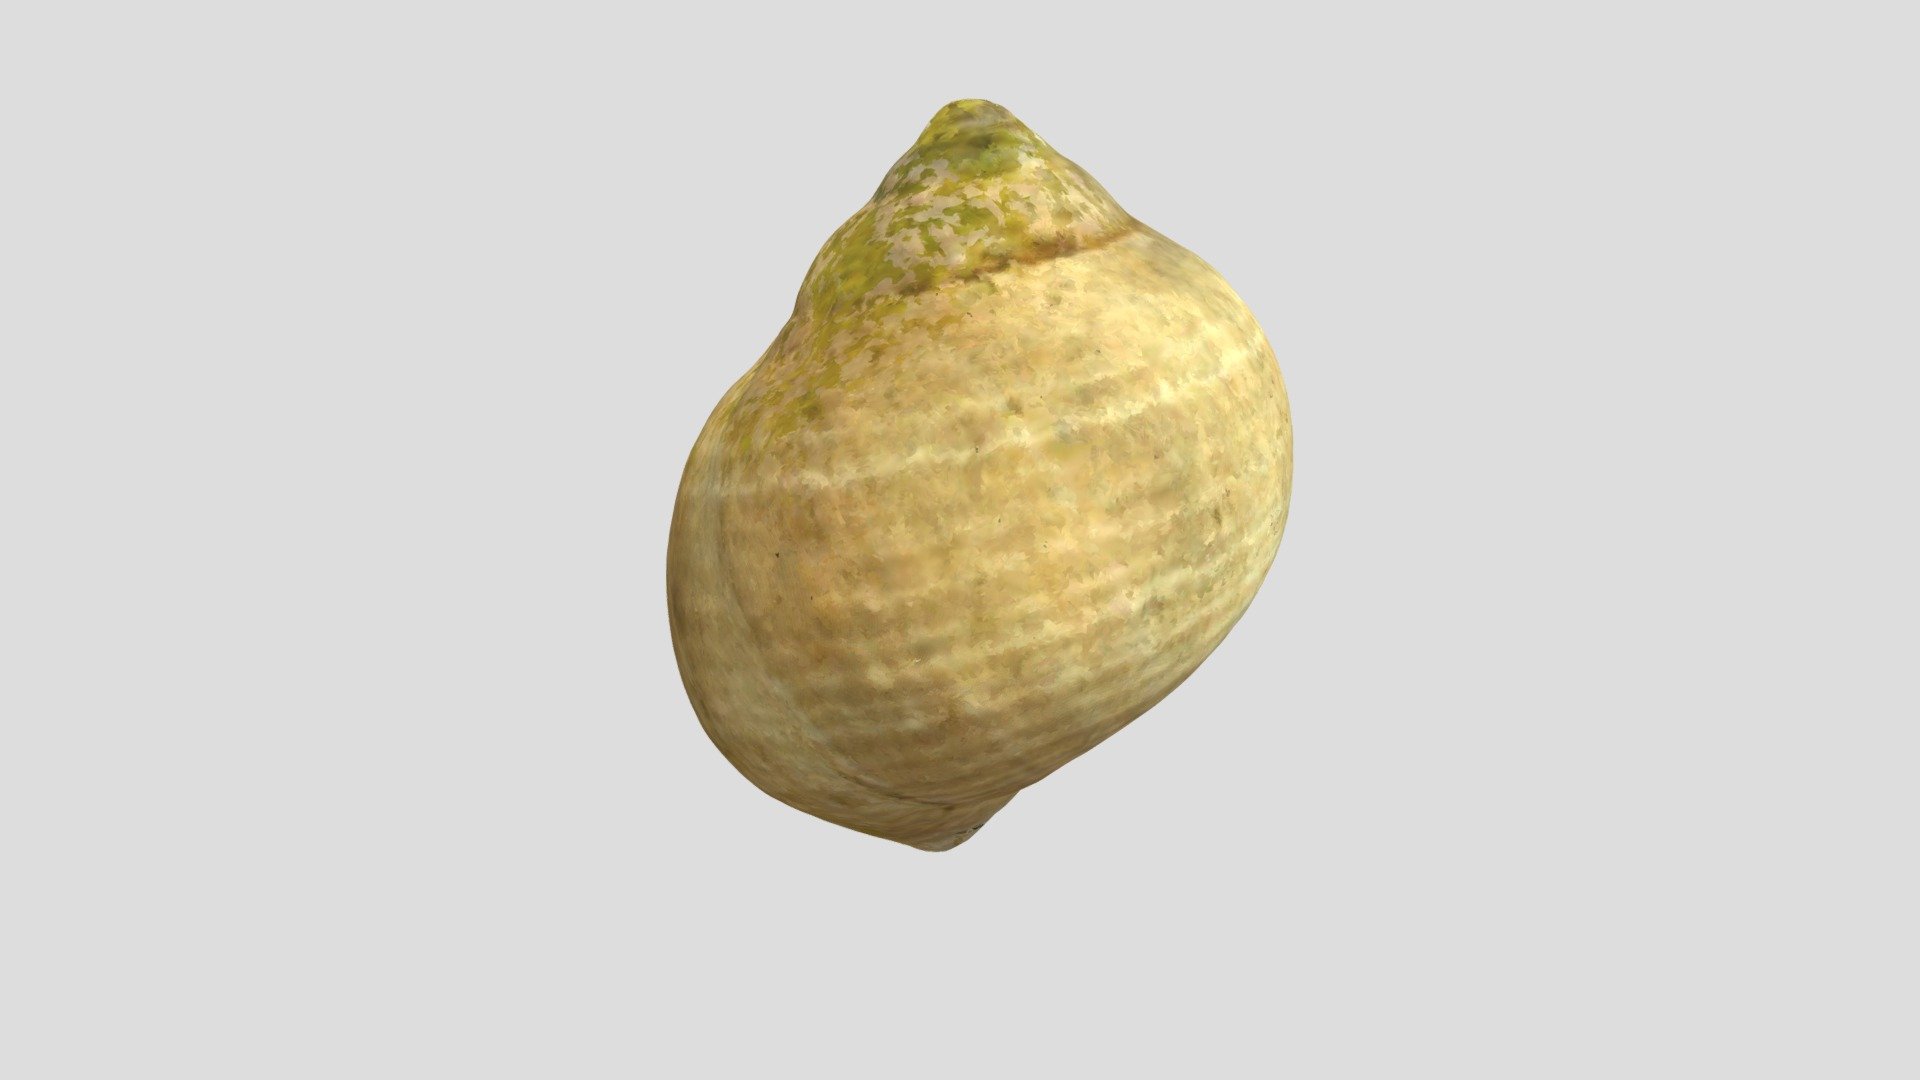 Snail Shell Vcu3d5313 Download Free 3d Model By Virtual Curation Lab Virtualcurationlab